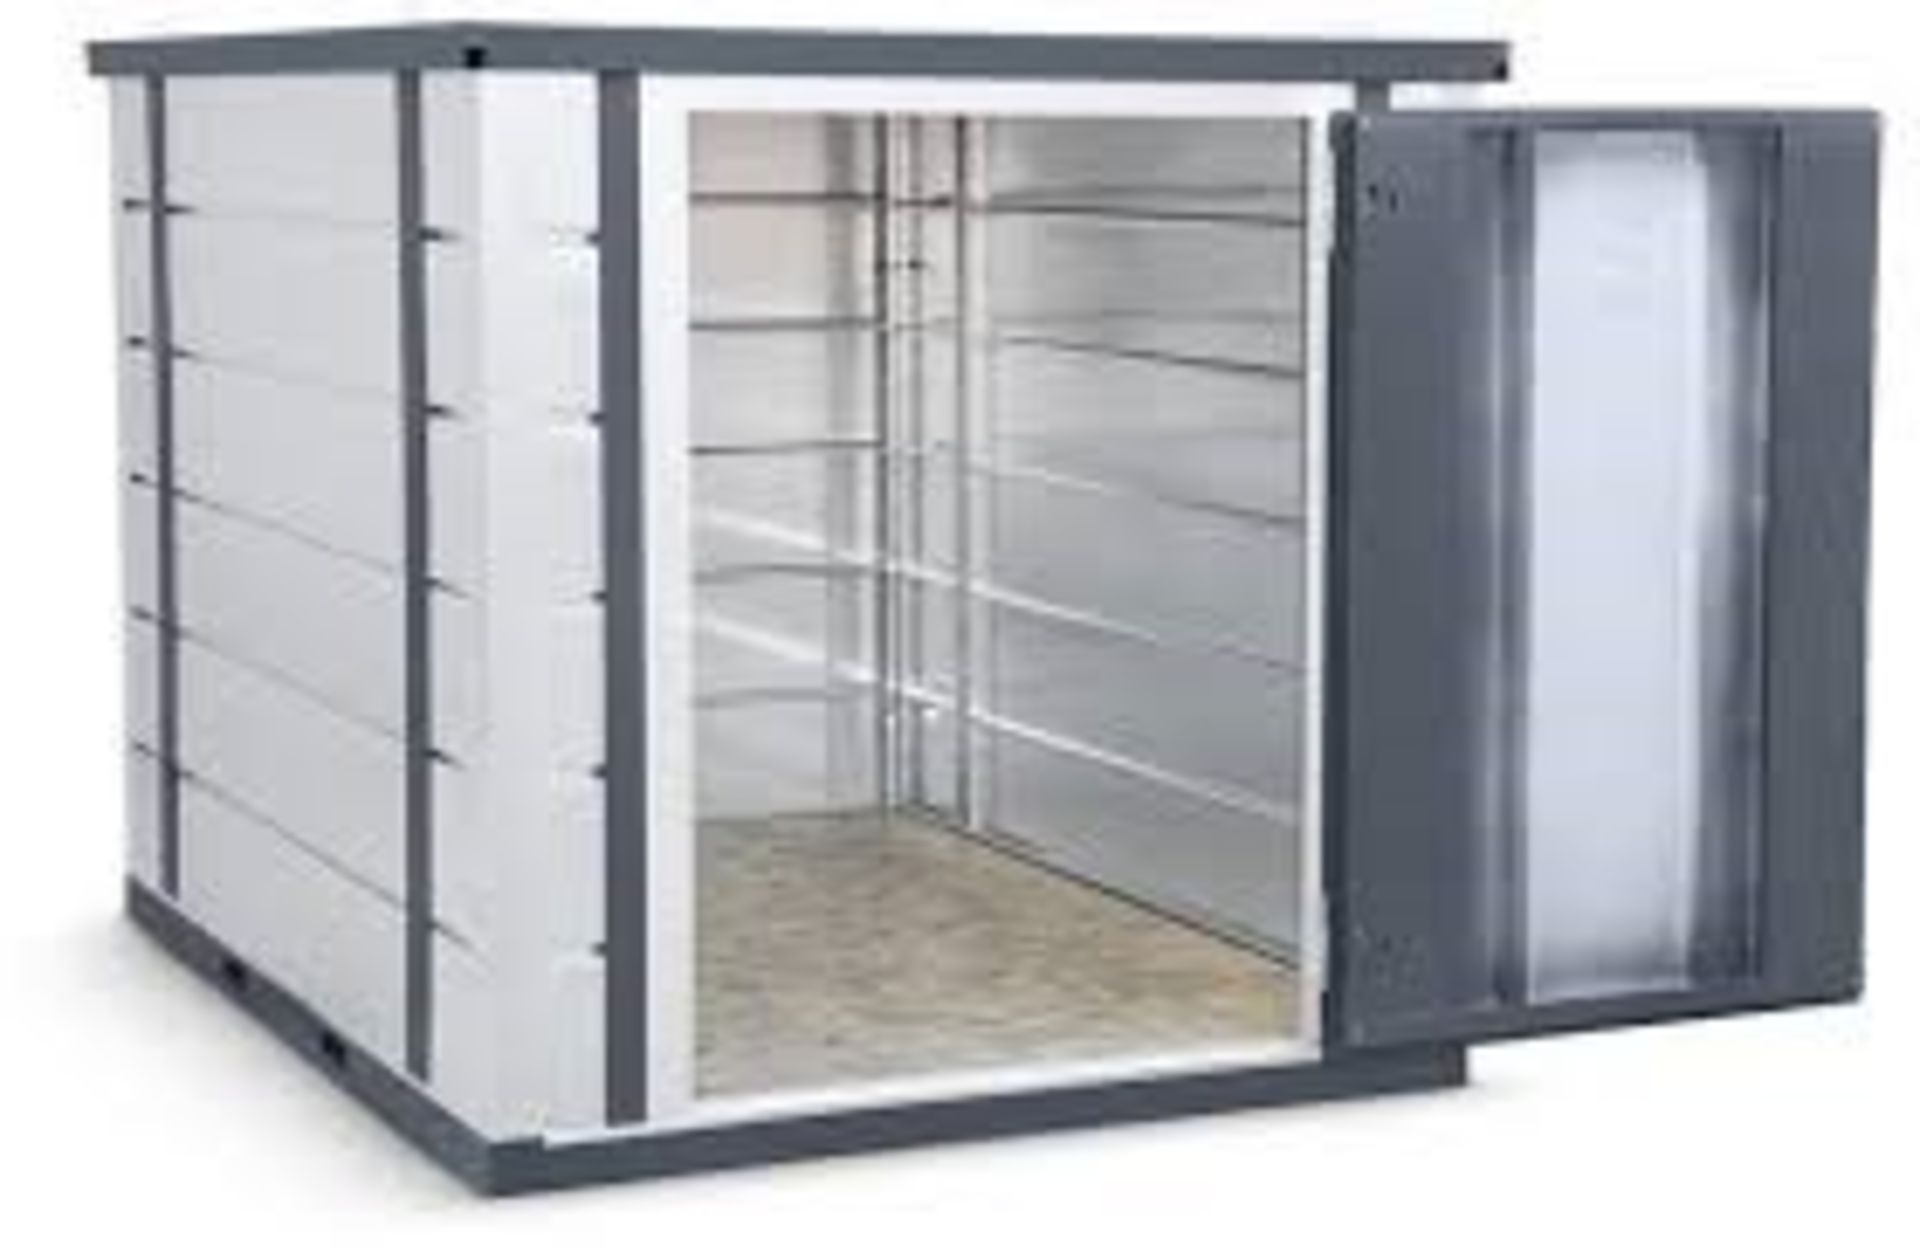 Armorgard, Forma-stor FR400-T 4m flat pack container (A1086811) - Image 8 of 8